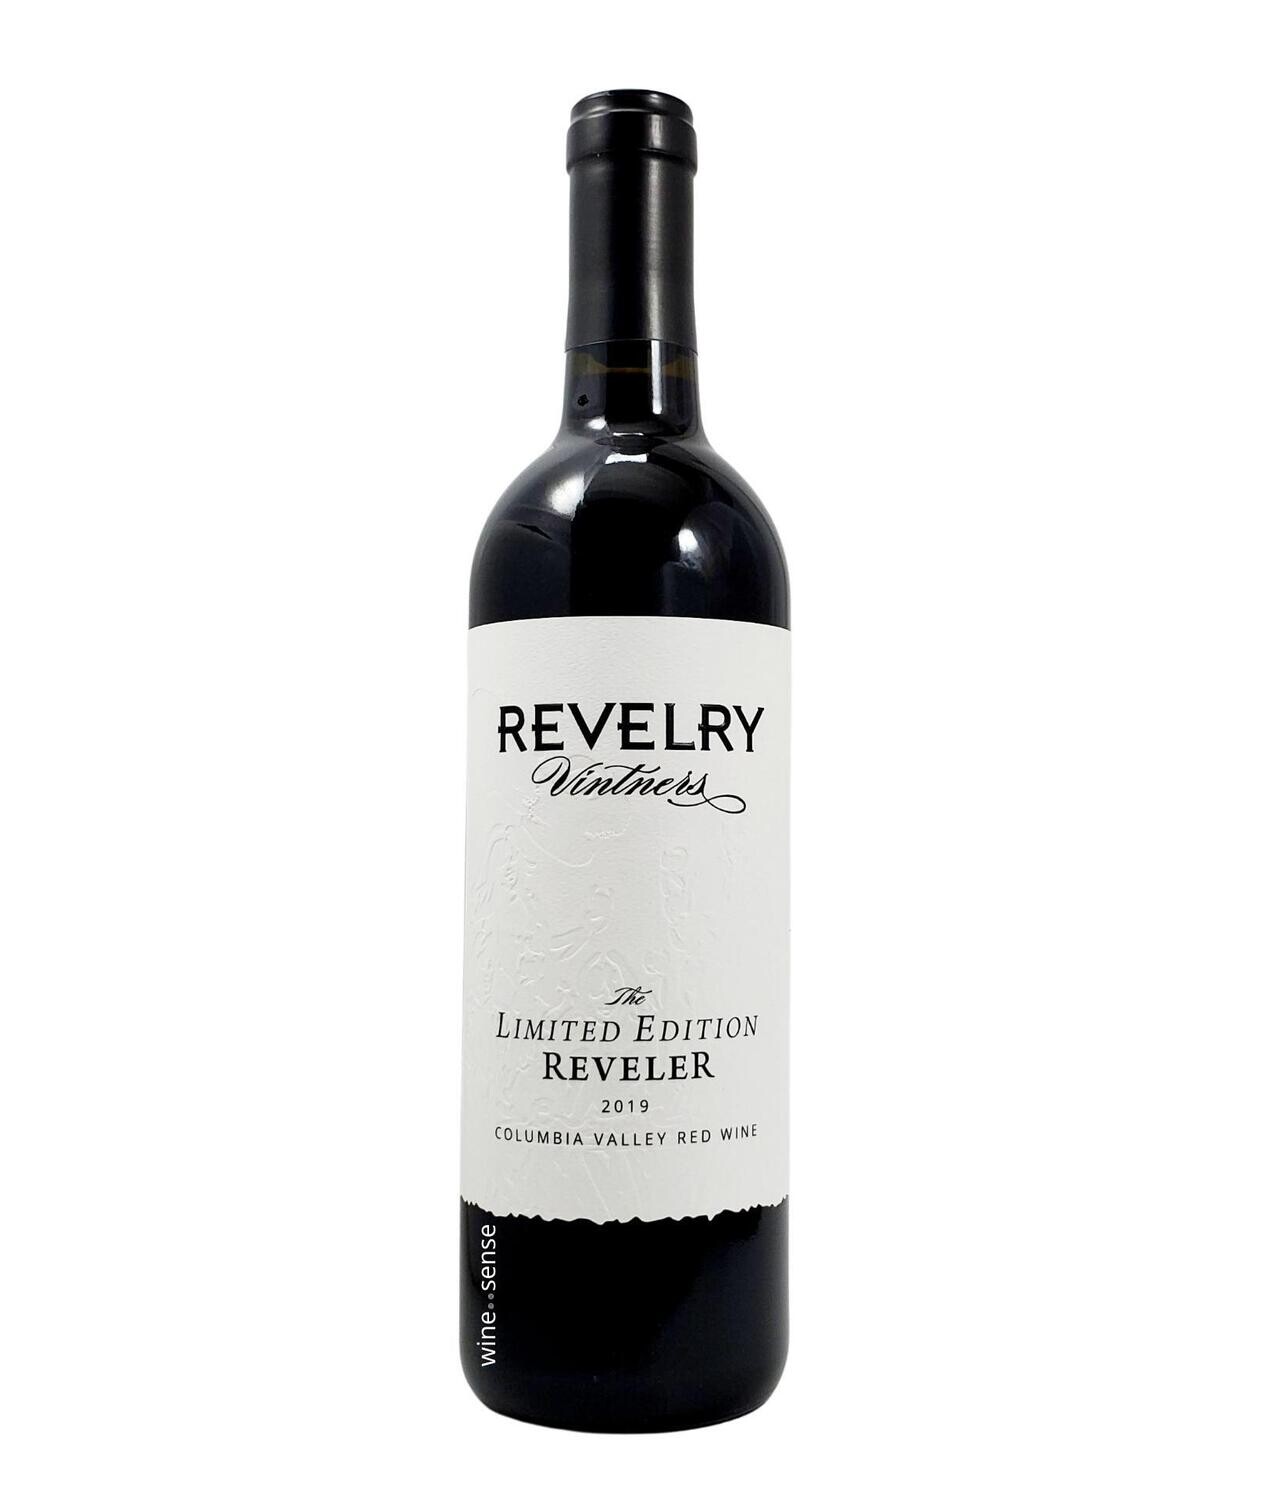 Revelry Vintners, The Limited Edition, Reveler Red, Columbia Valley